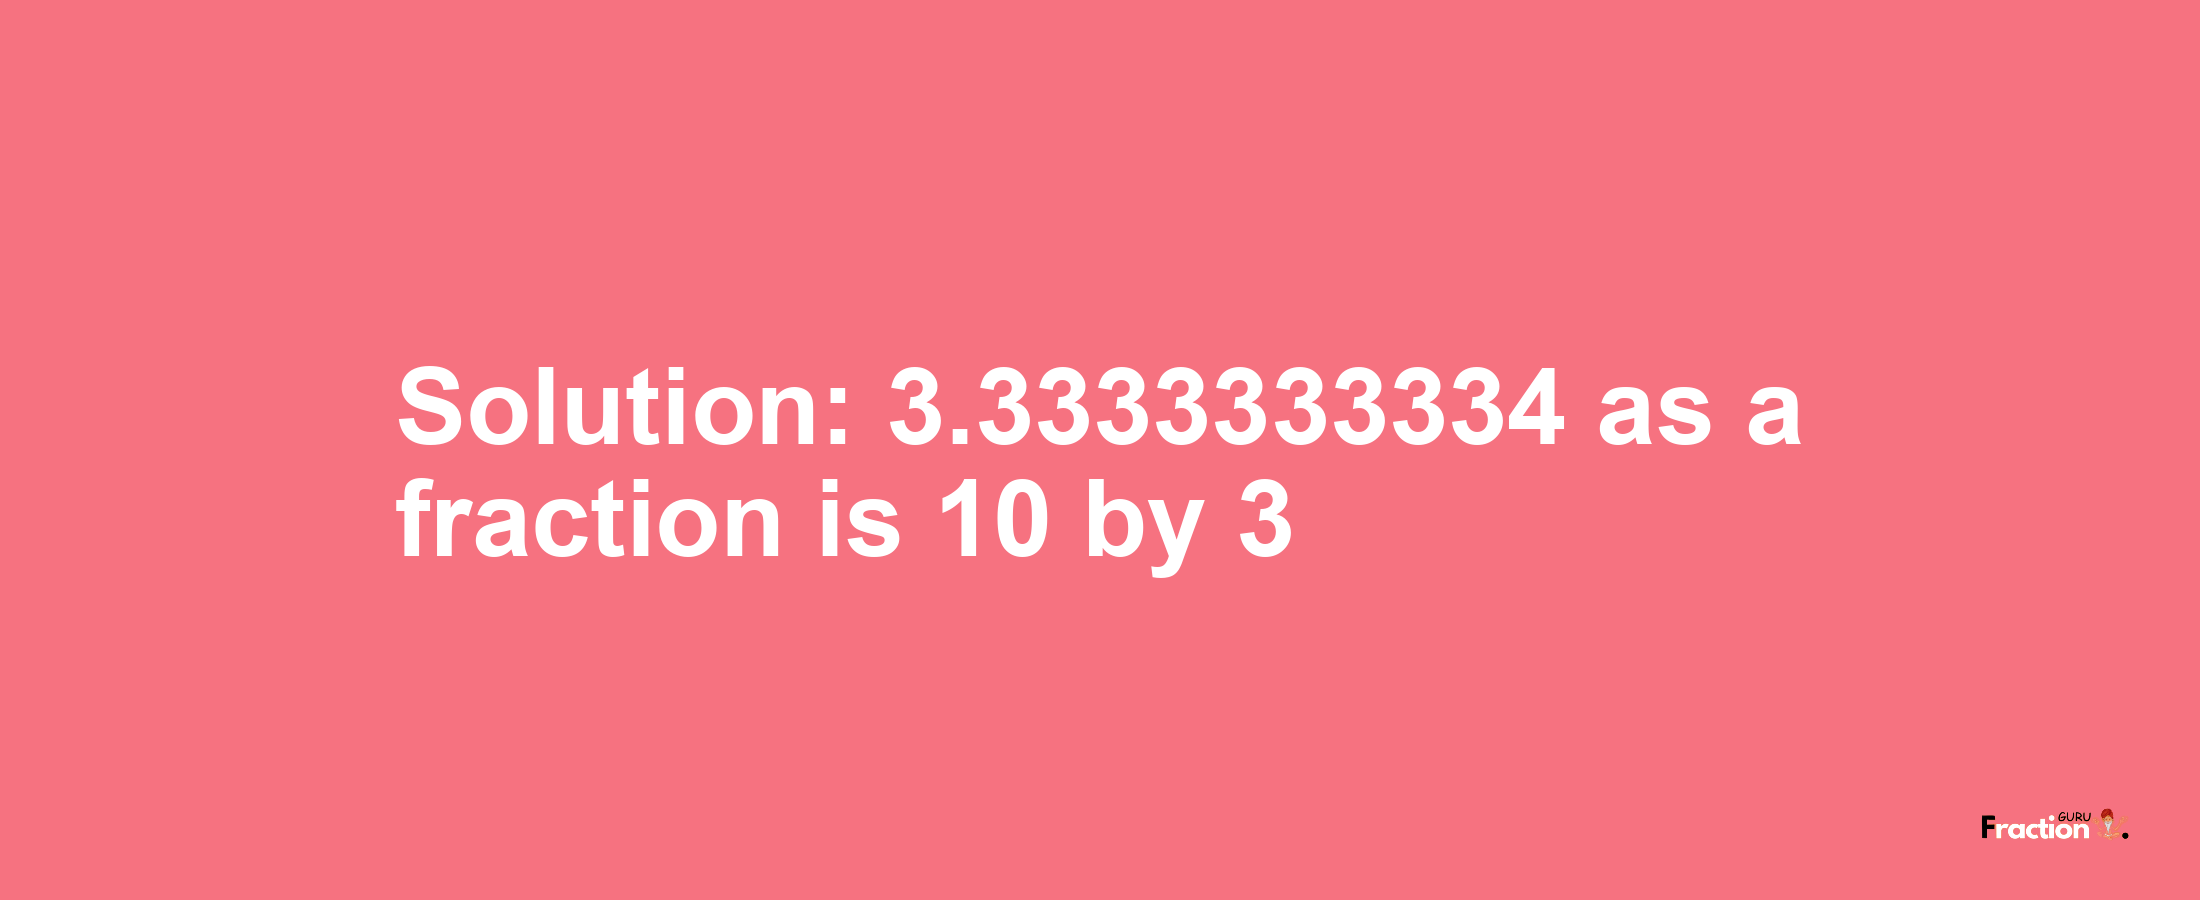 Solution:3.3333333334 as a fraction is 10/3